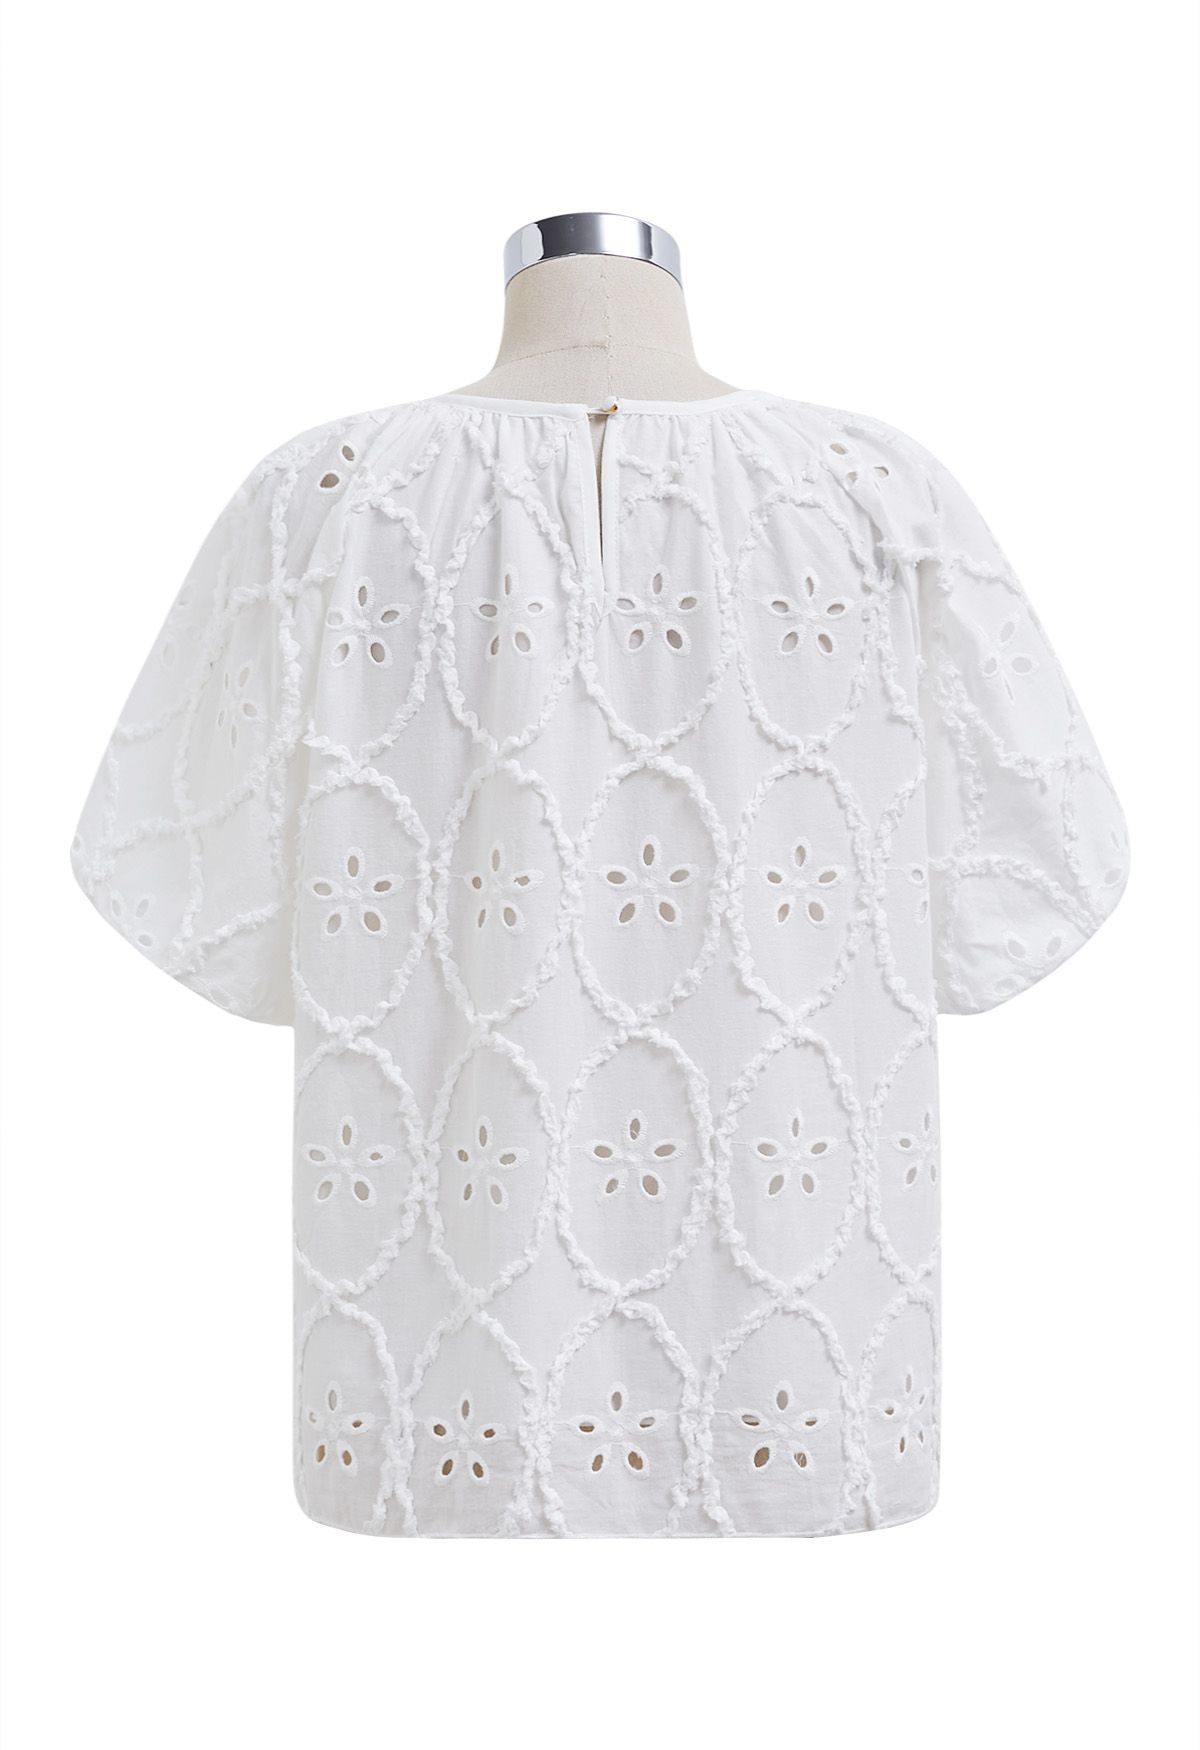 Floral Eyelet Embroidery Bubble Sleeves Top in White